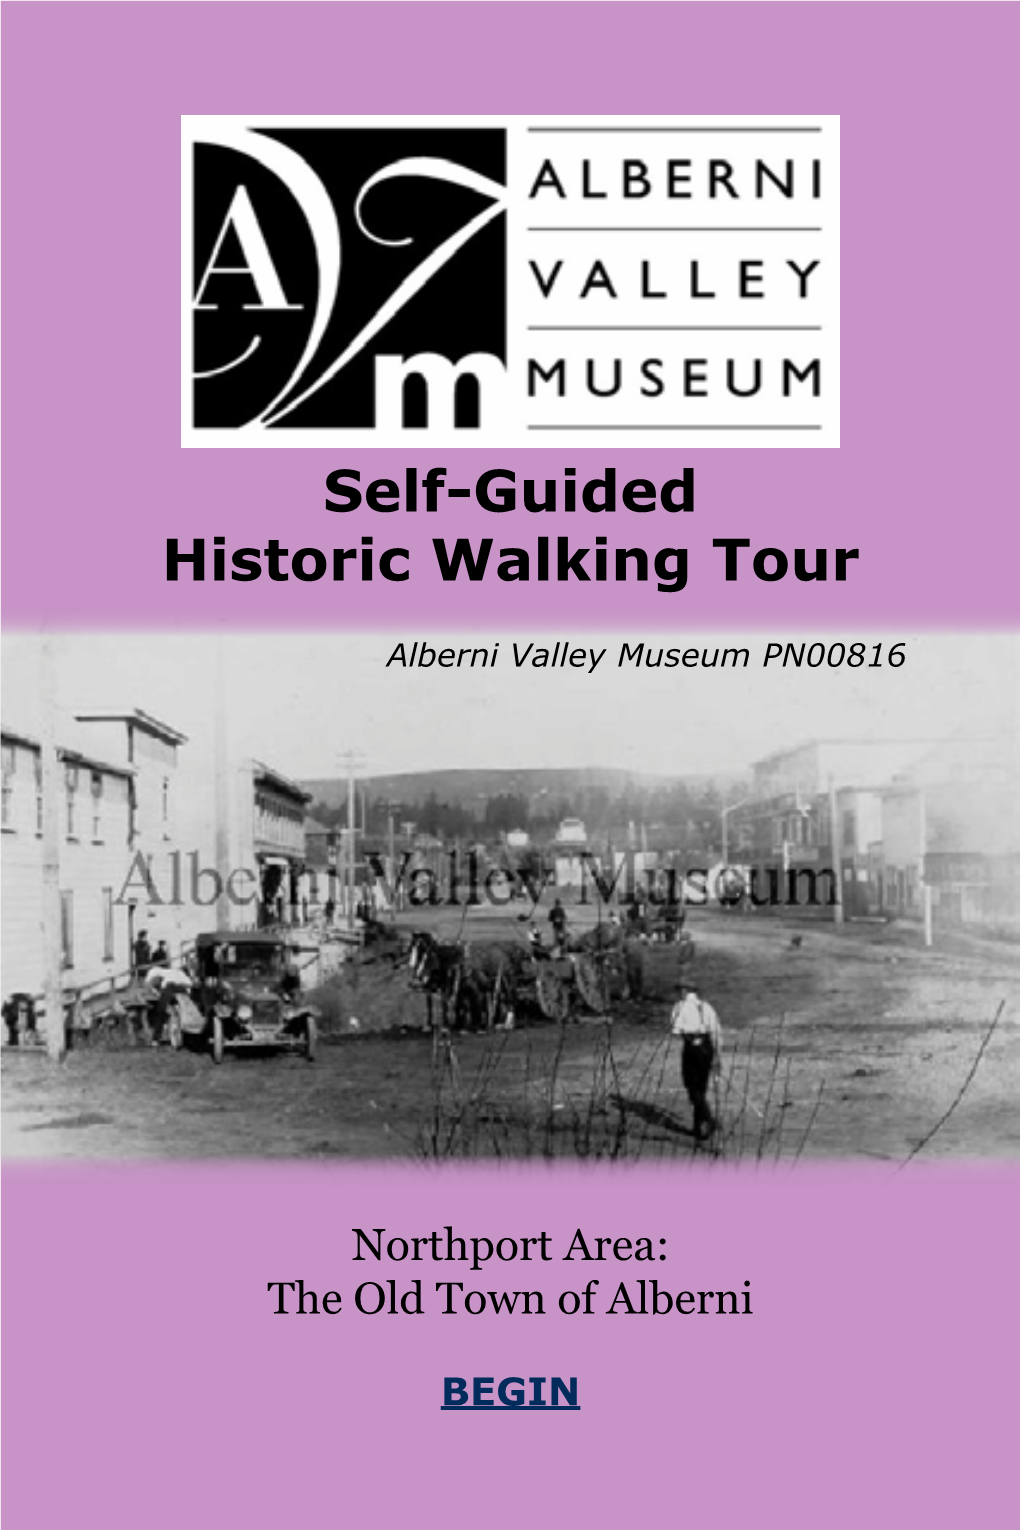 Self-Guided Historic Walking Tour